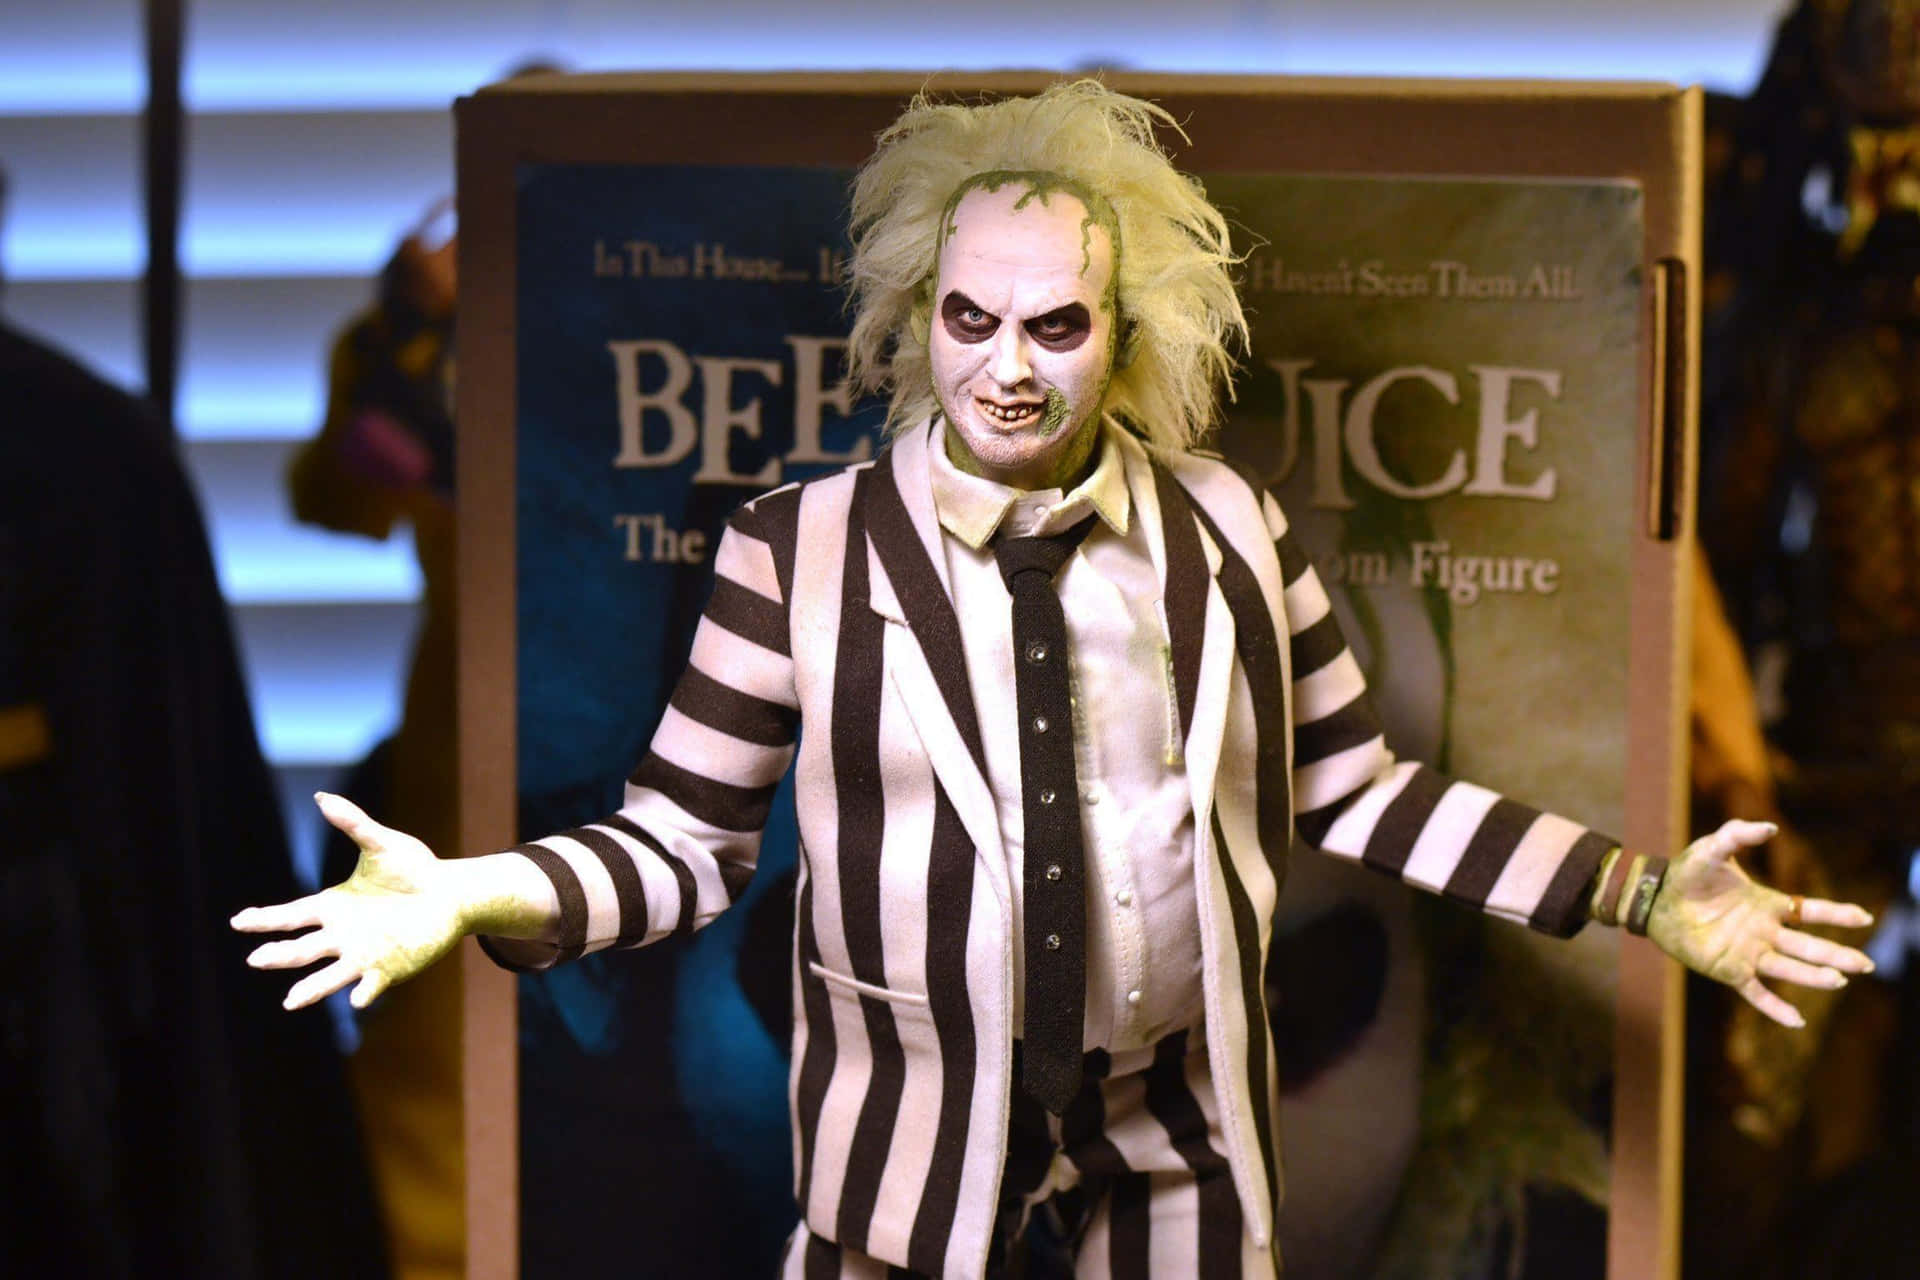 Beetlejuice Having Fun in a Quirky and Otherworldly Environment